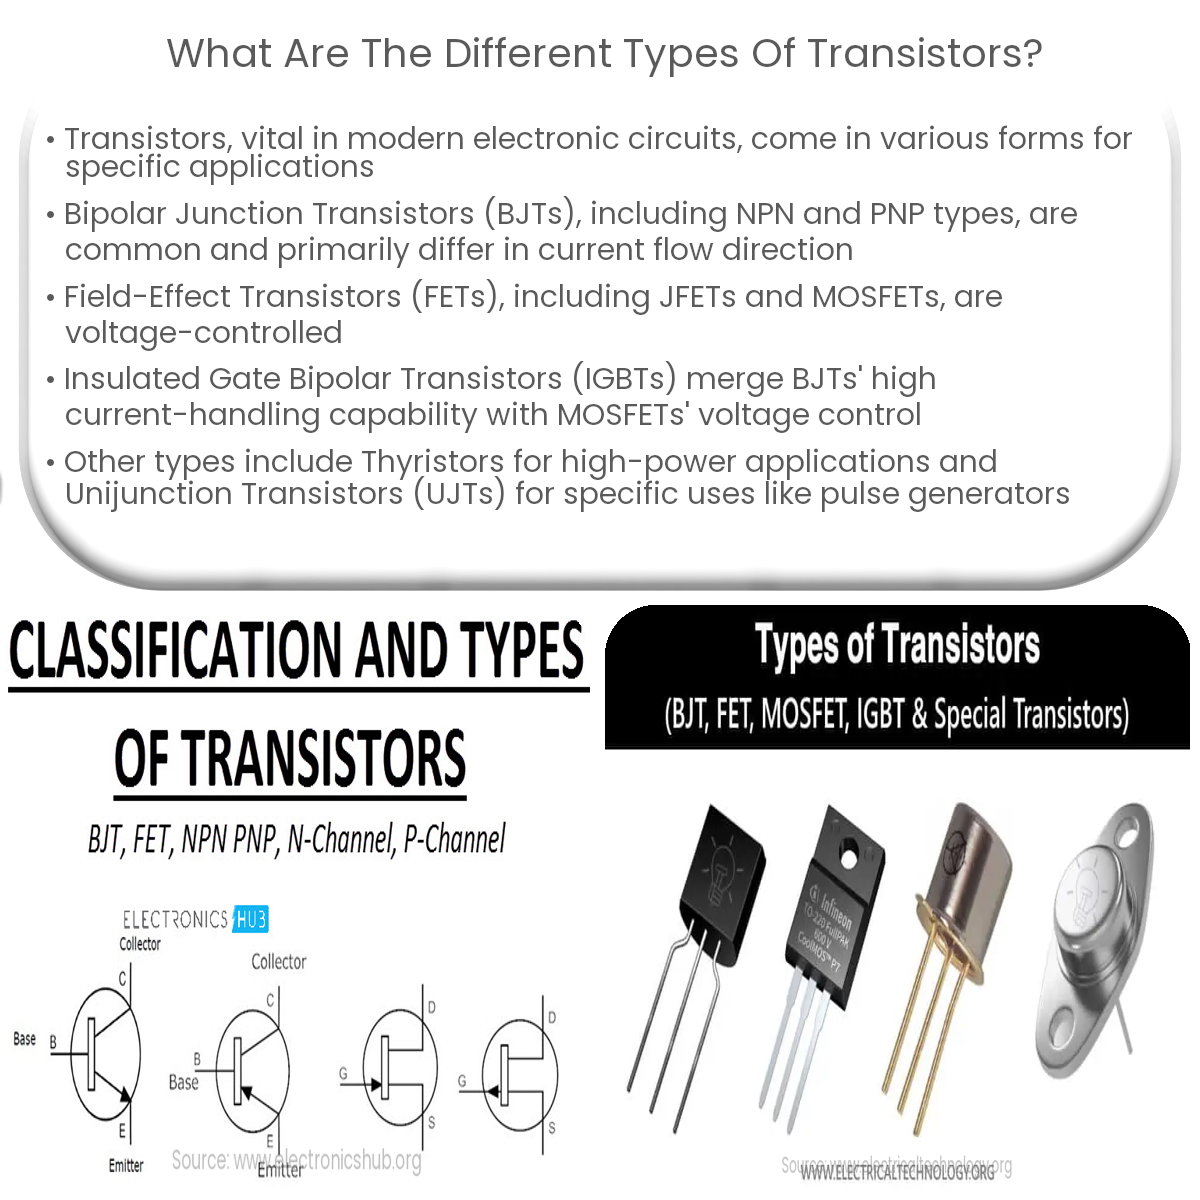 What are the different types of transistors?